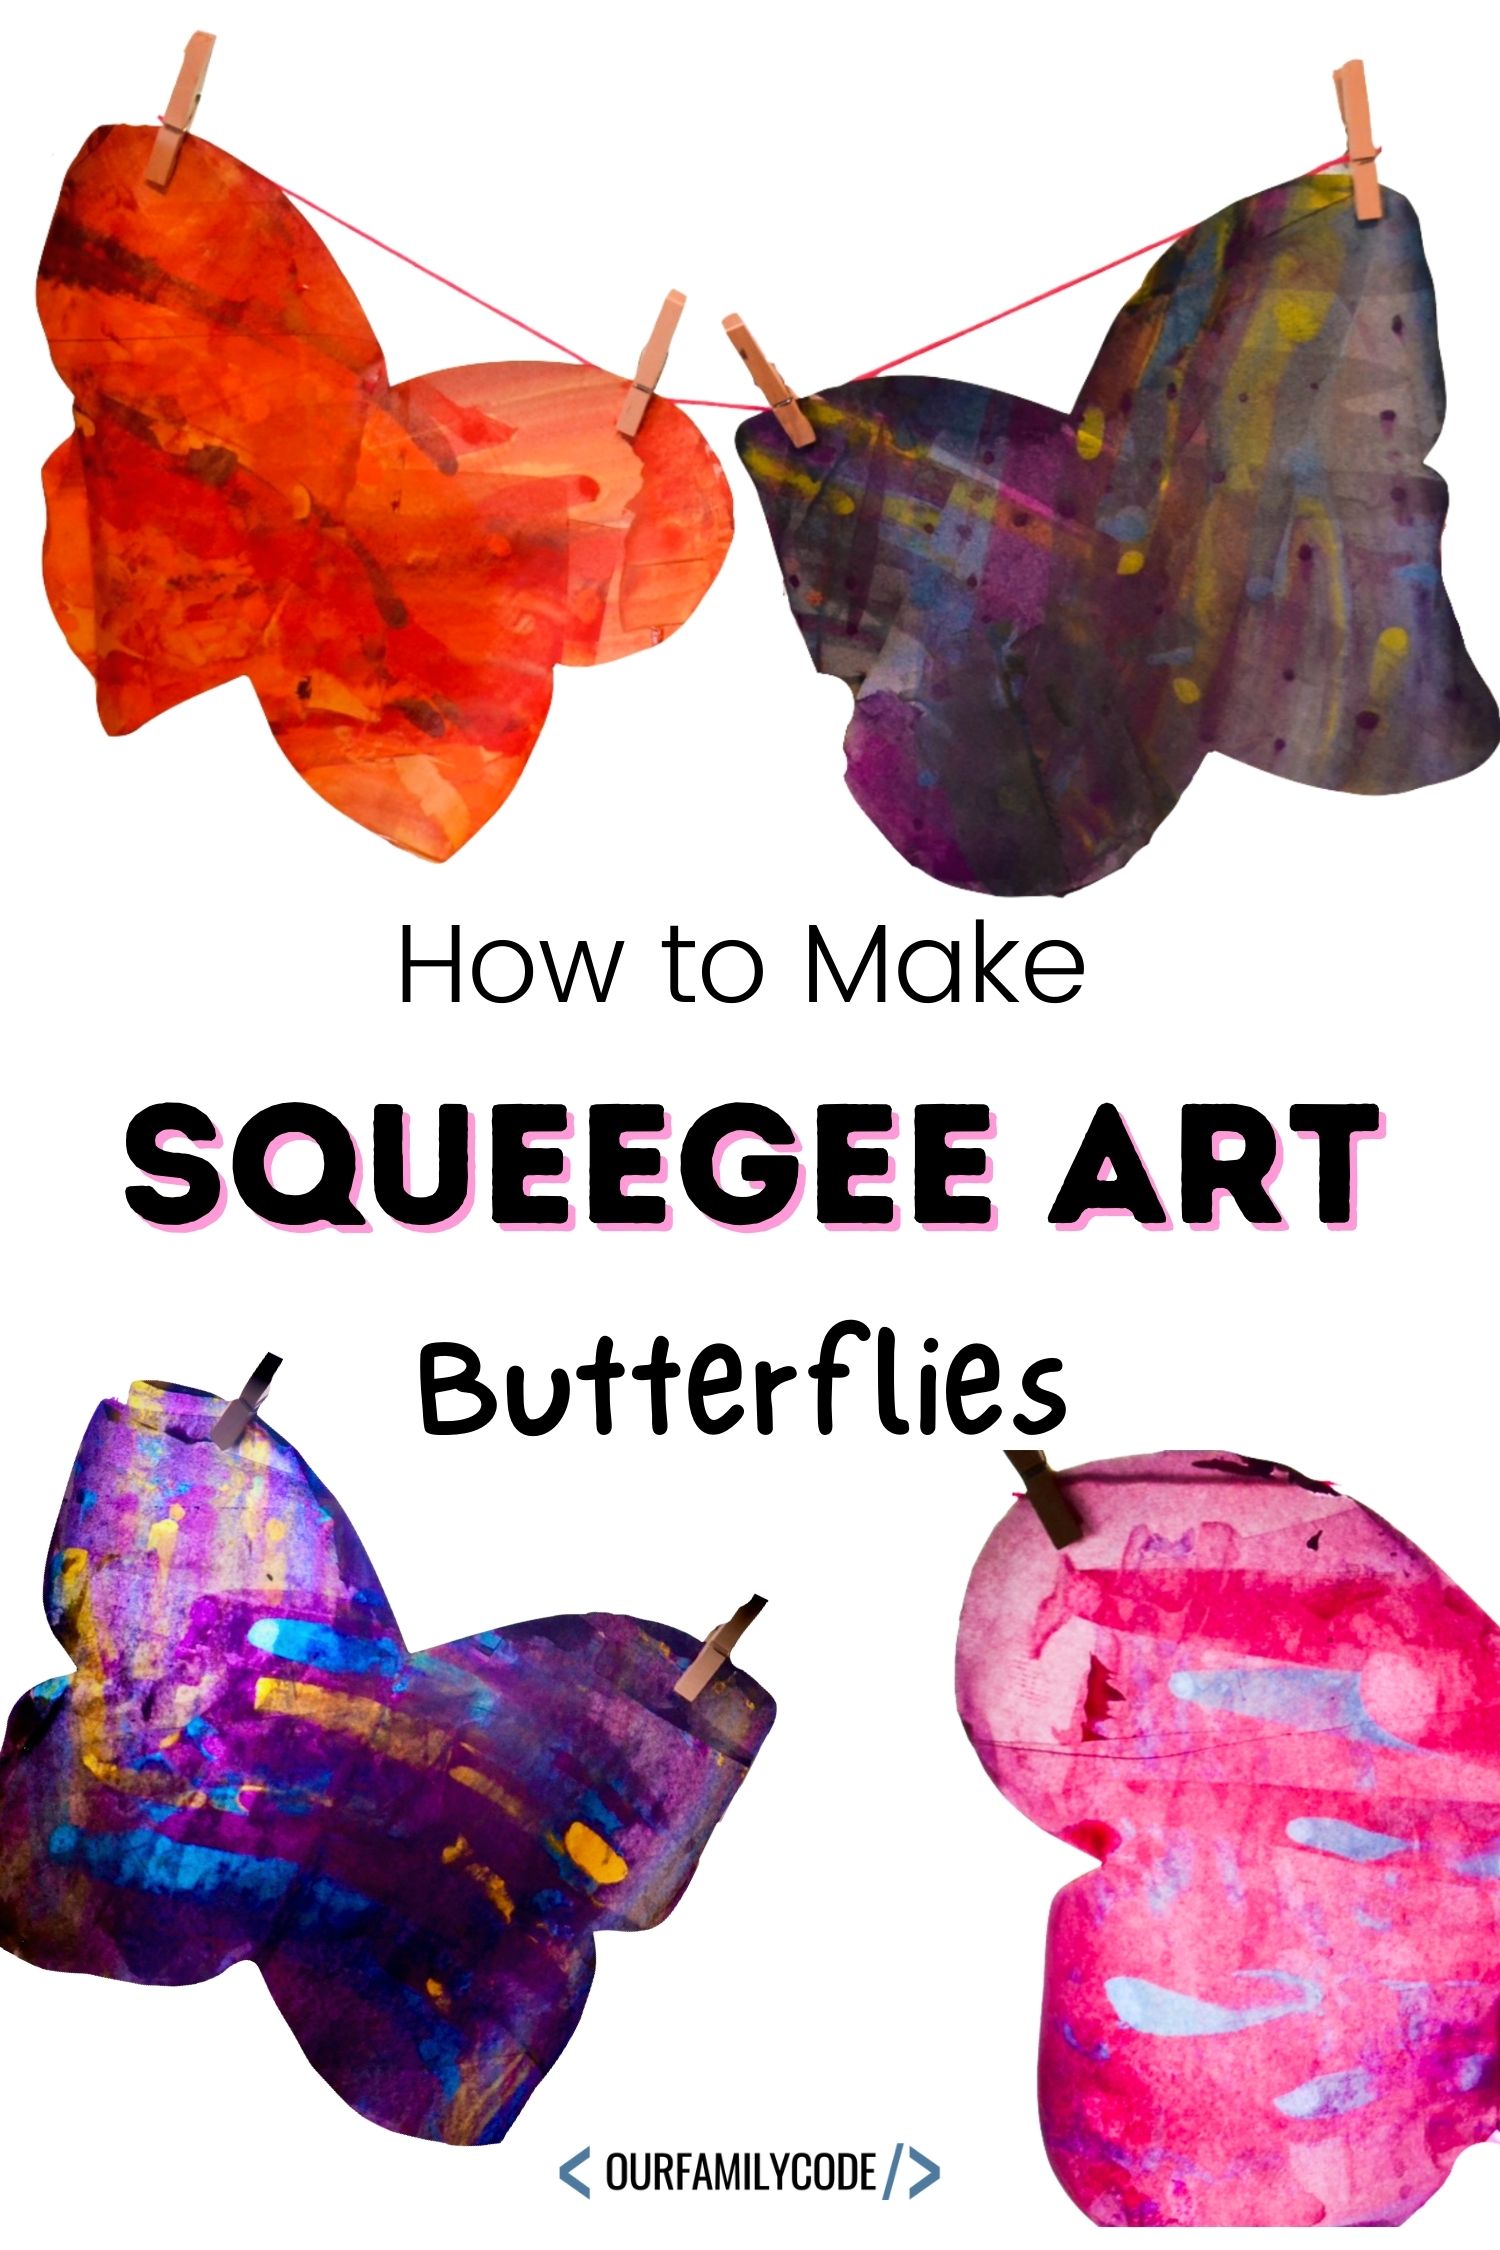 A picture of How to Make Squeegee Art Butterflies on a white background.